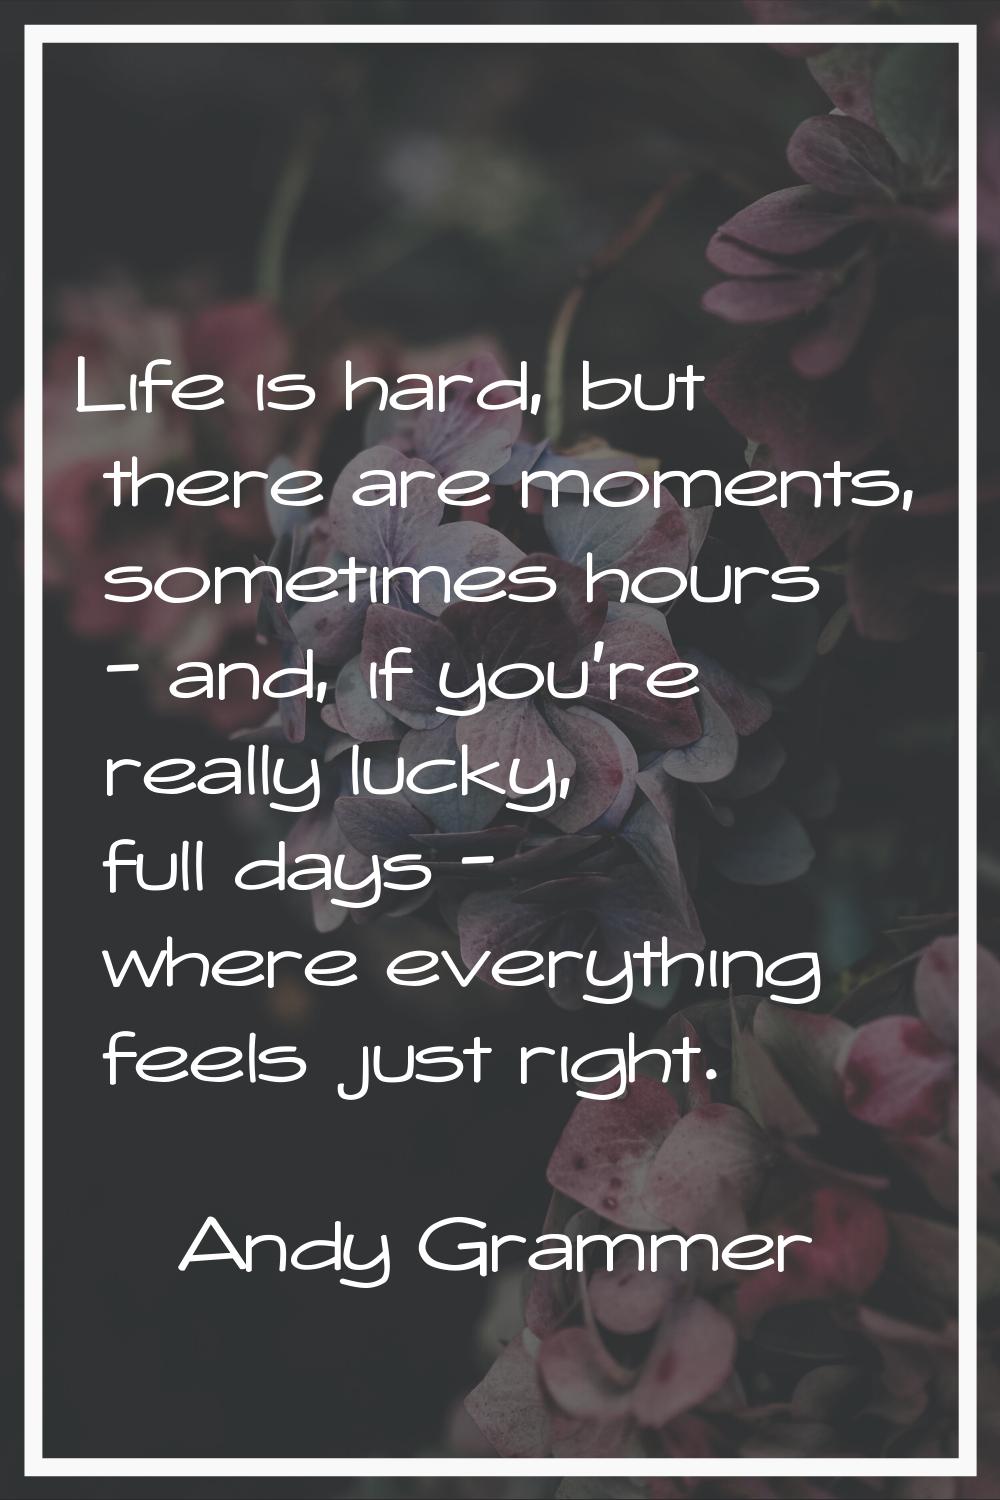 Life is hard, but there are moments, sometimes hours - and, if you're really lucky, full days - whe